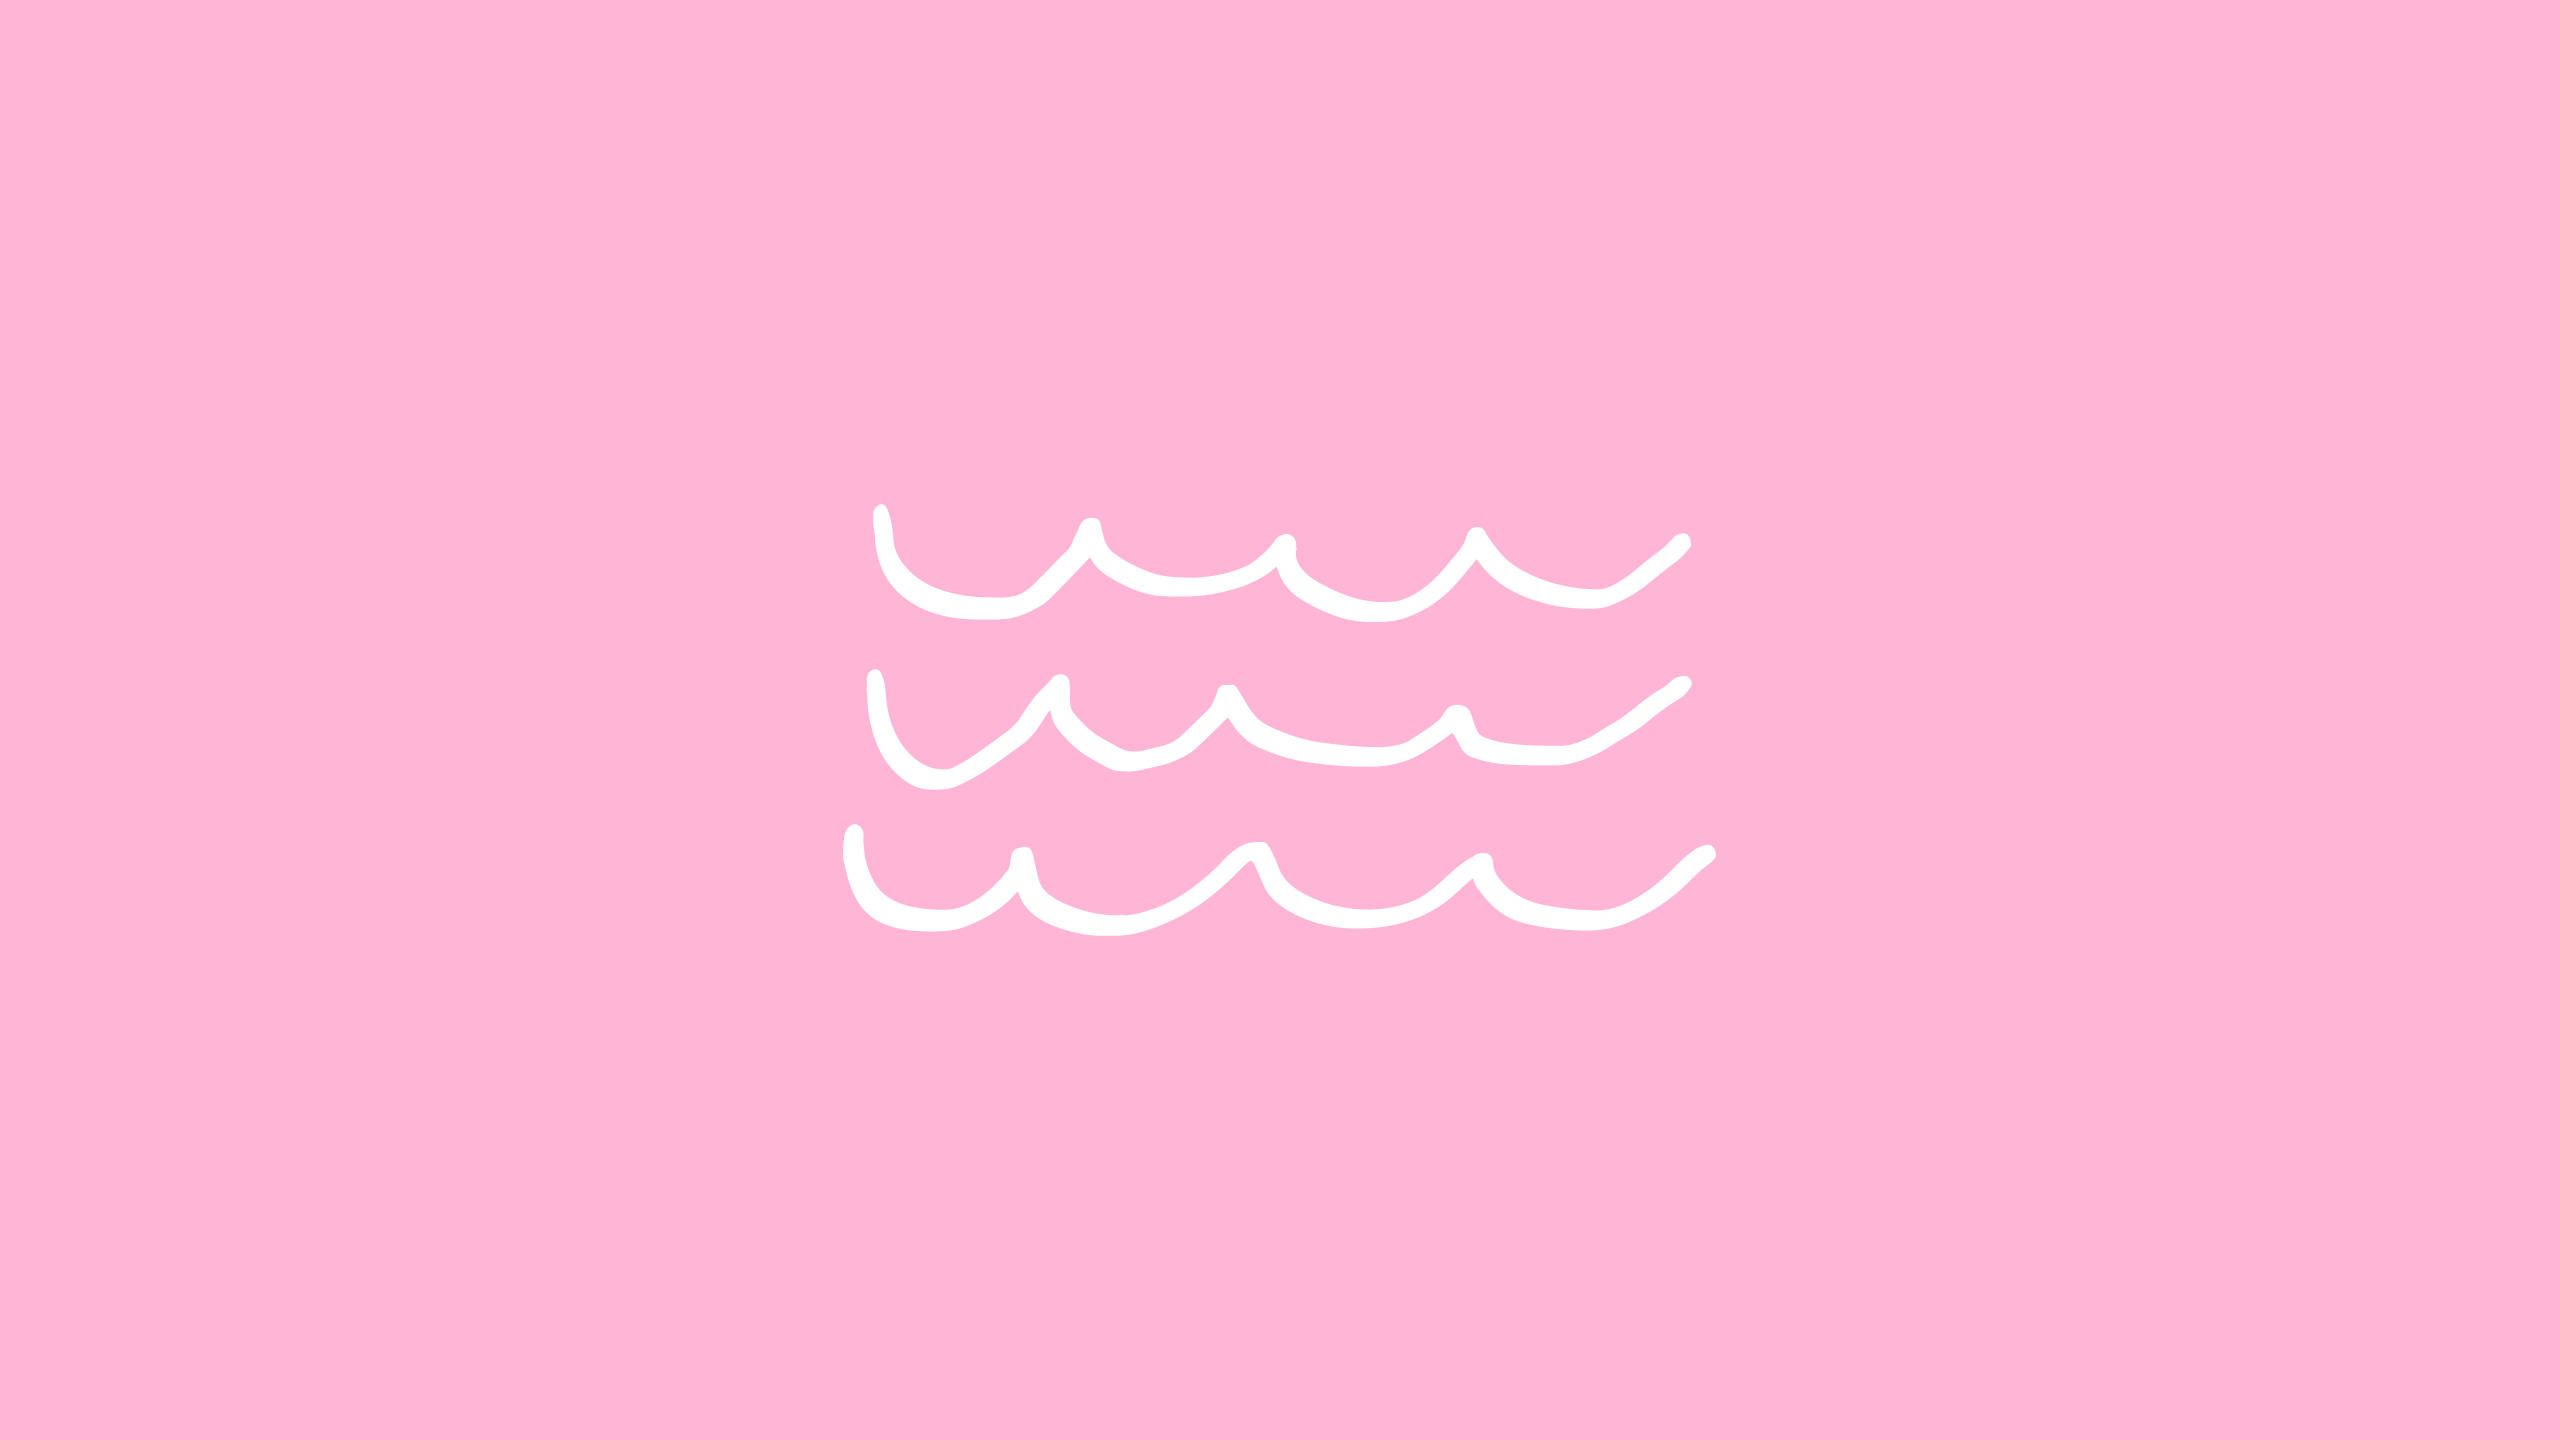 A white wave icon on a pink background - 2560x1440